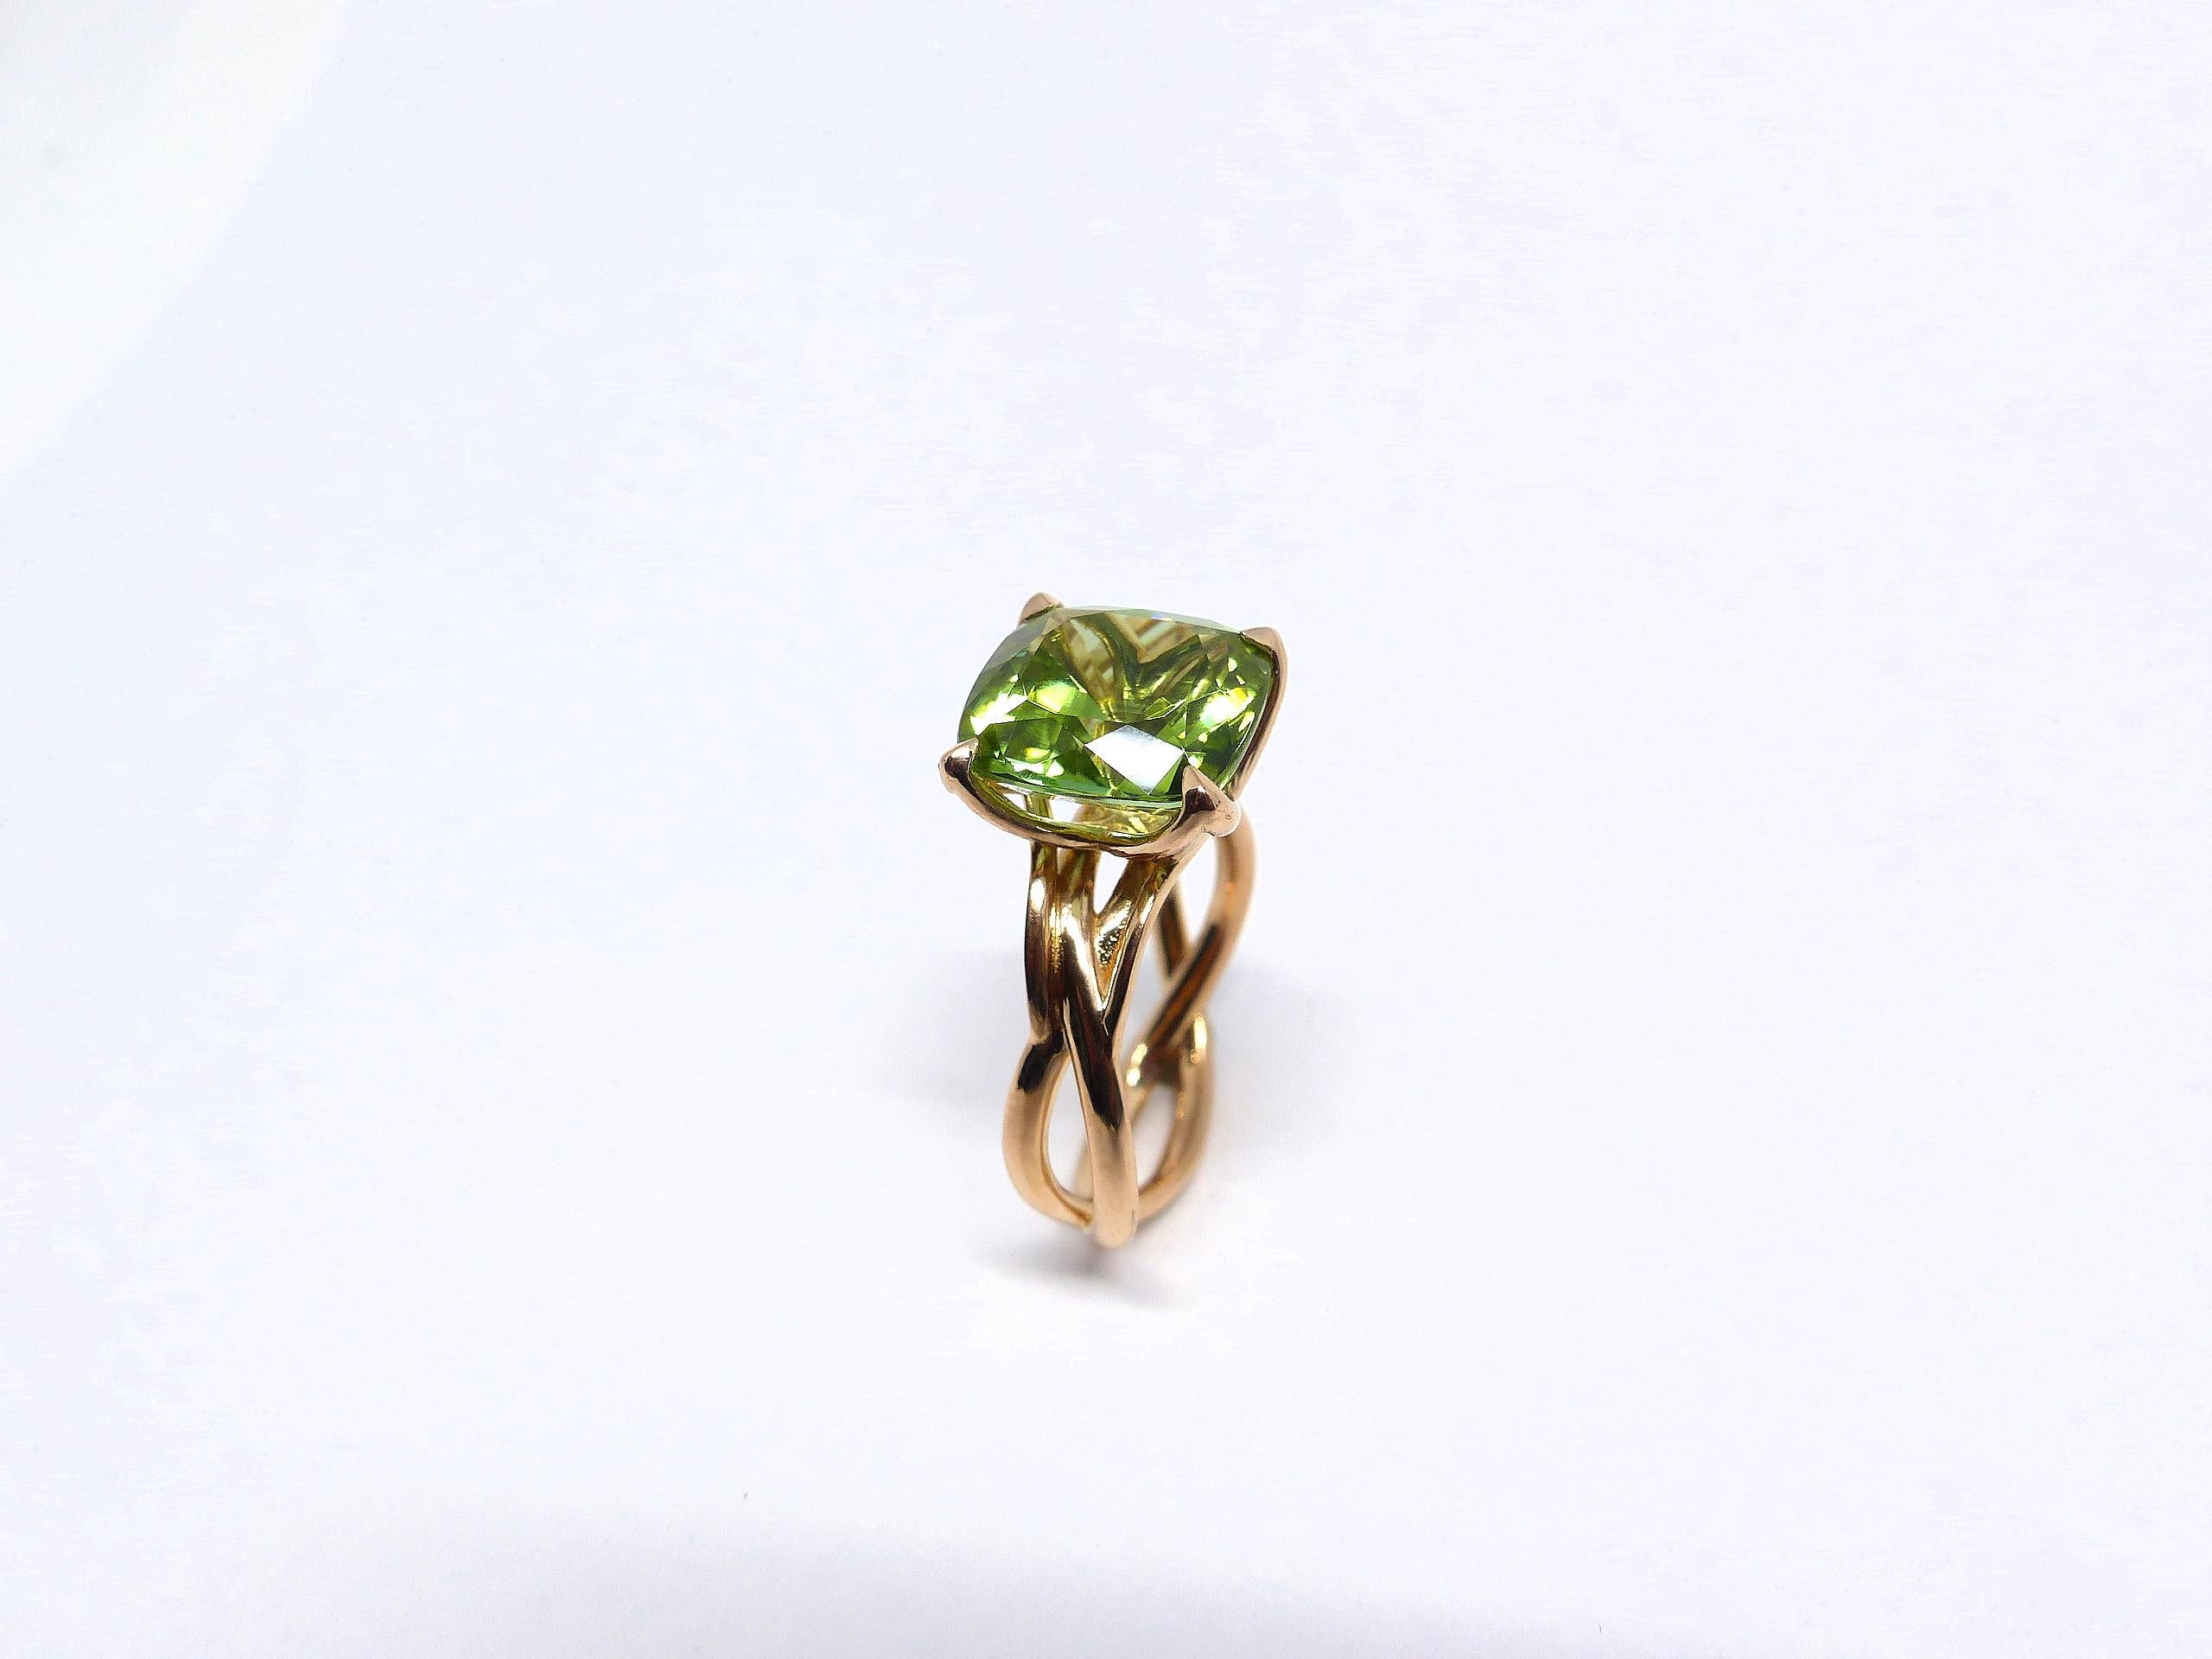 Contemporary Ring in Rose Gold with 1 Green Tourmaline Cushion Shape 11x11mm. For Sale